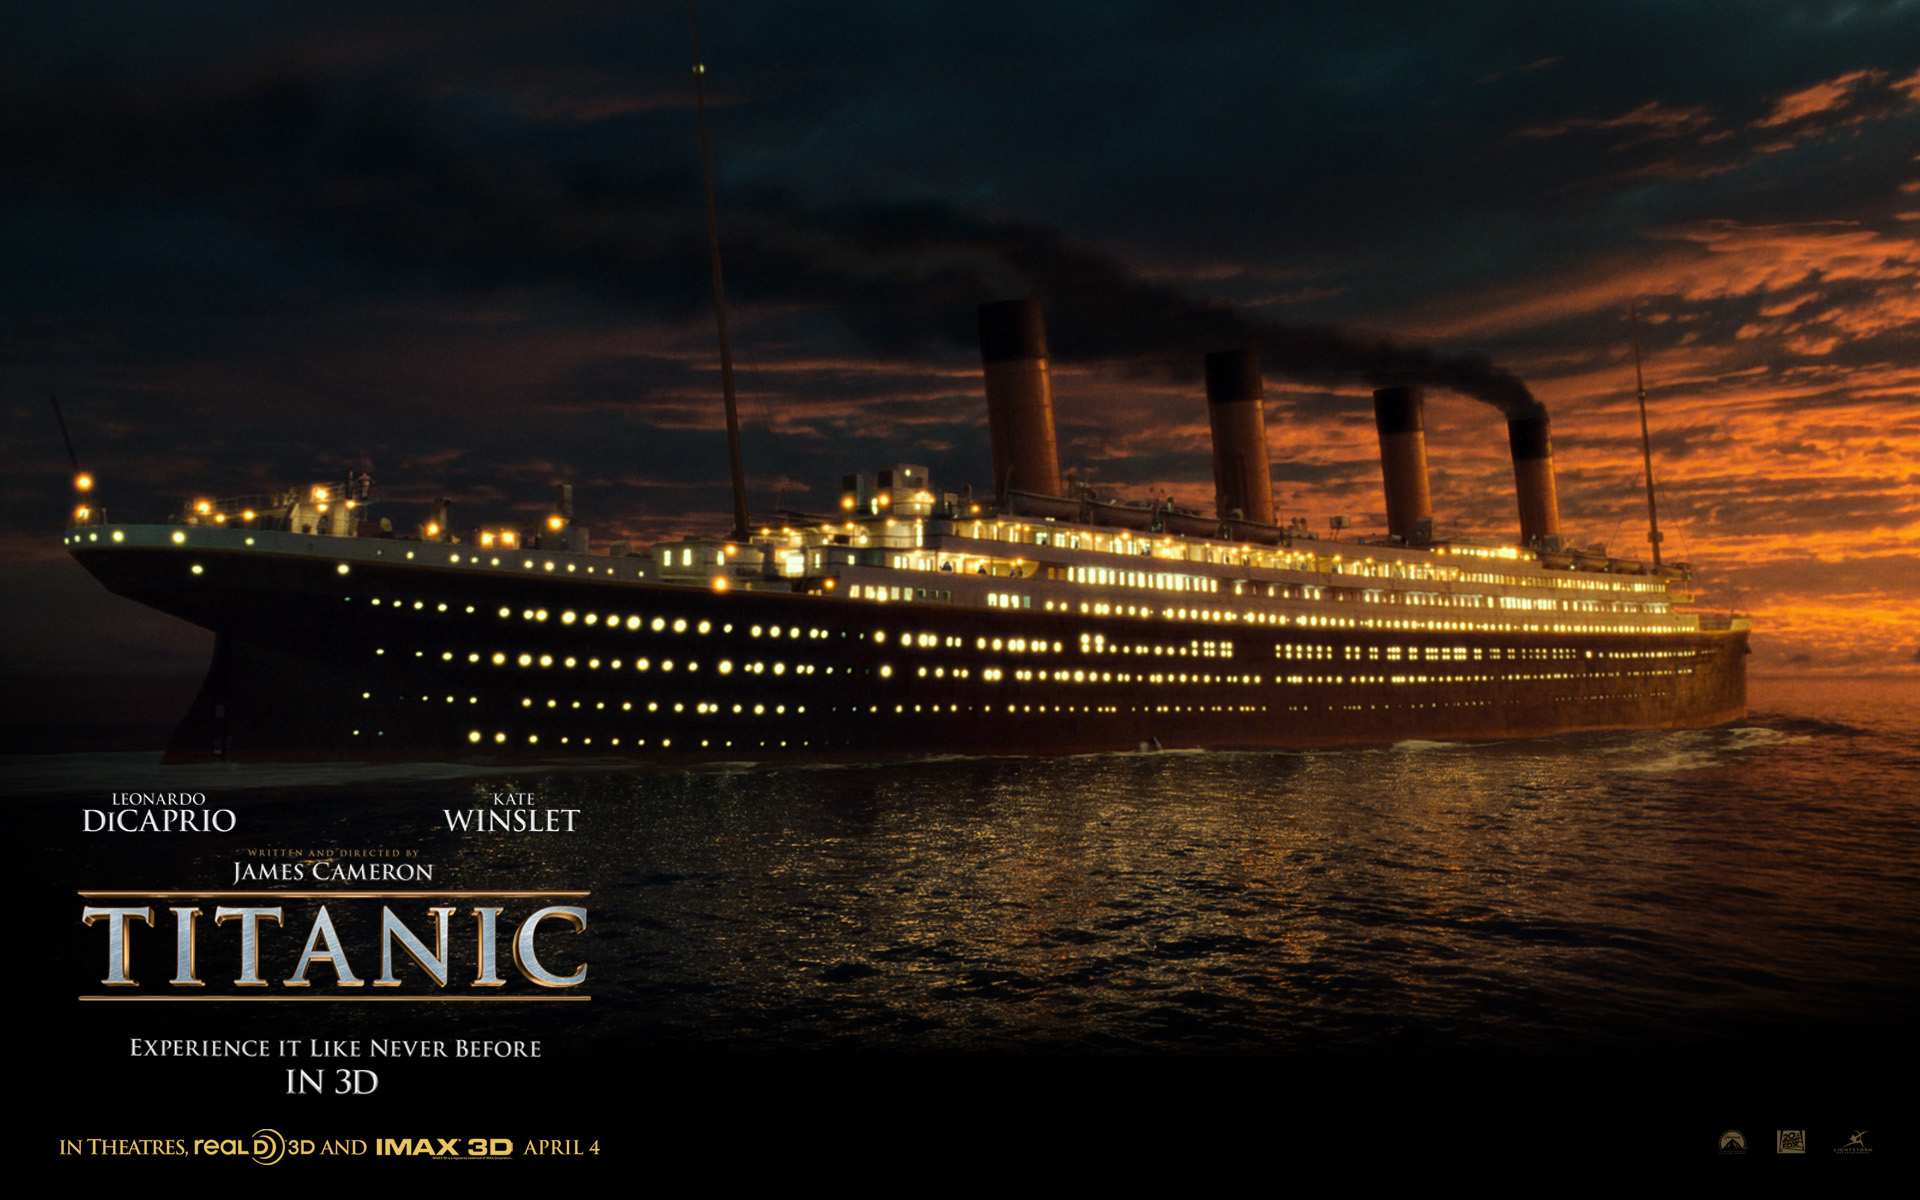 Titanic Ship Wallpaper Download Wallpaper Pictures to pin